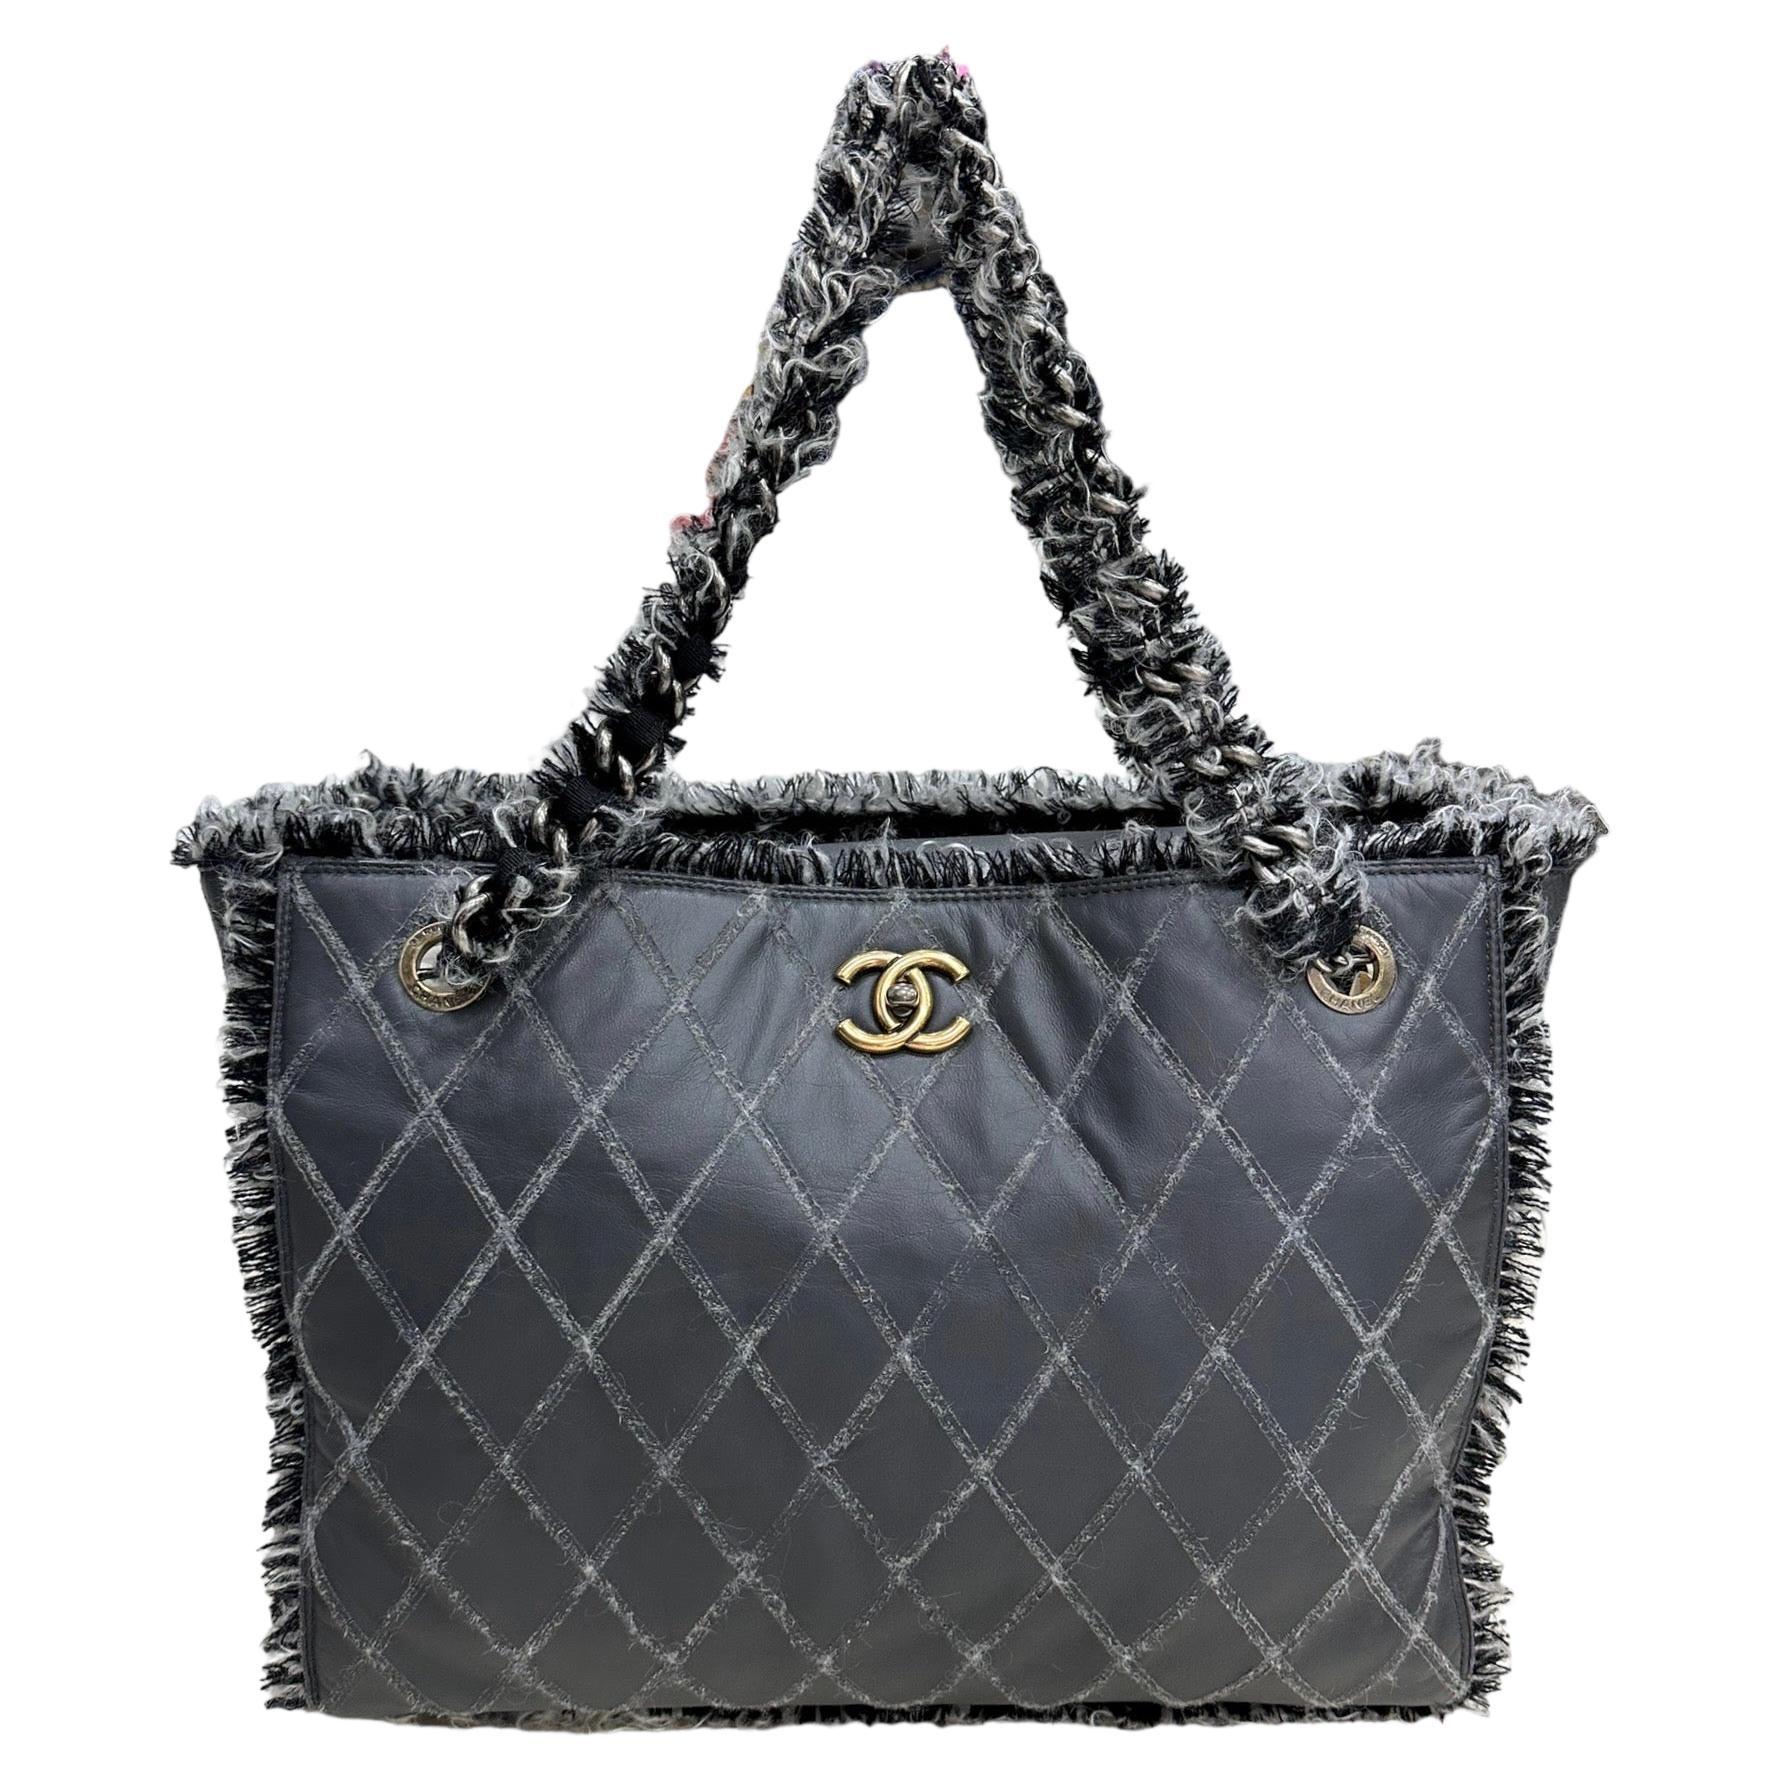 Why it costs almost $10,000 to buy this popular Chanel bag